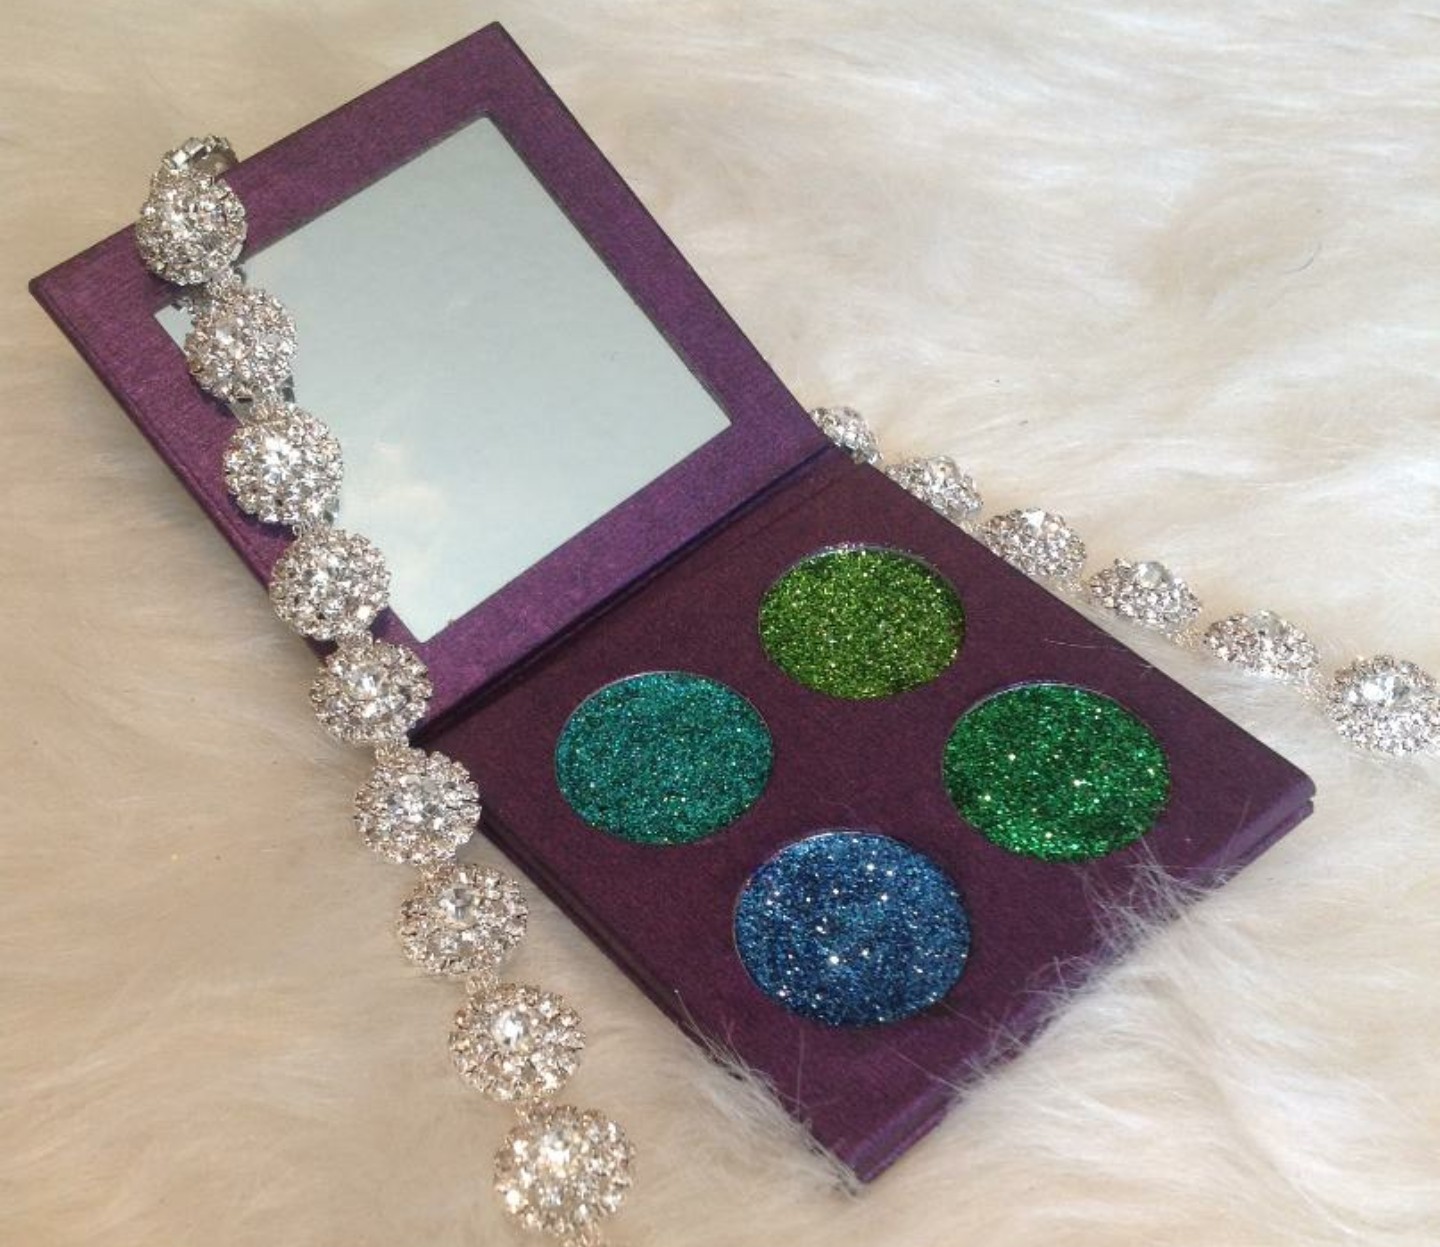 Primary image for 4 26 mm Breath Taking Hand Pressed Blue & Green Tones Glitter Eyeshadow